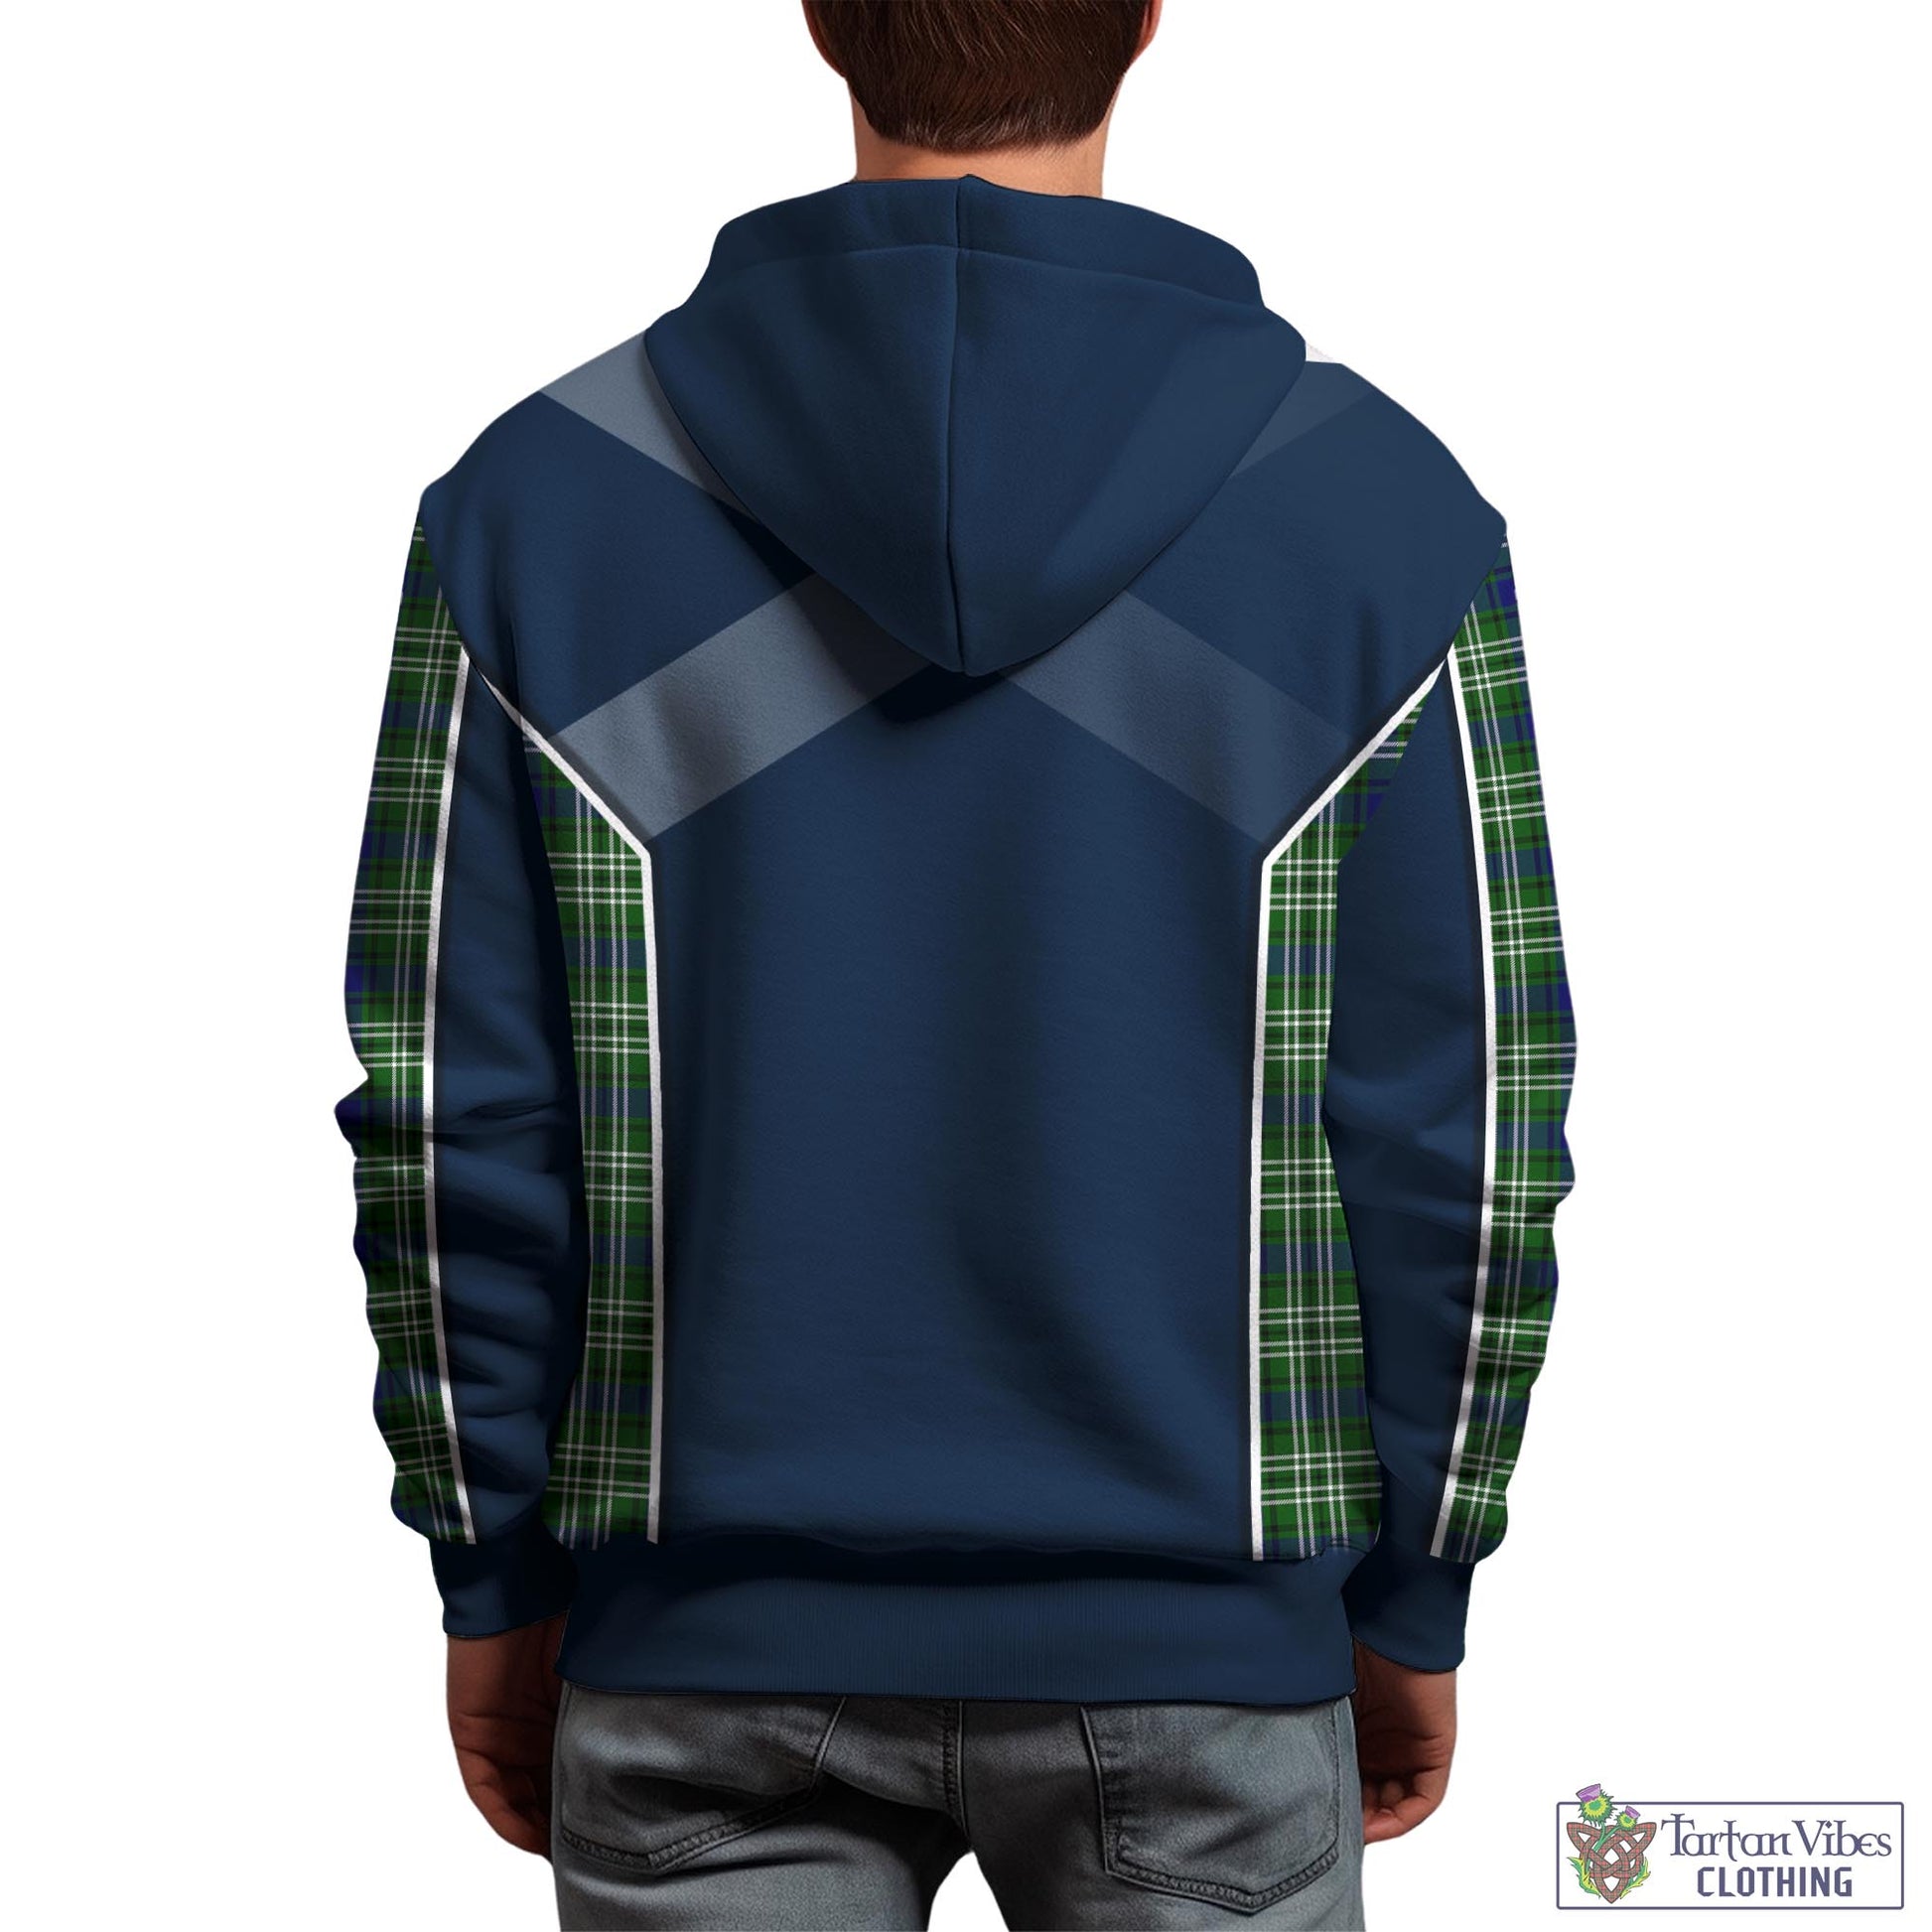 Tartan Vibes Clothing Swinton Tartan Hoodie with Family Crest and Lion Rampant Vibes Sport Style